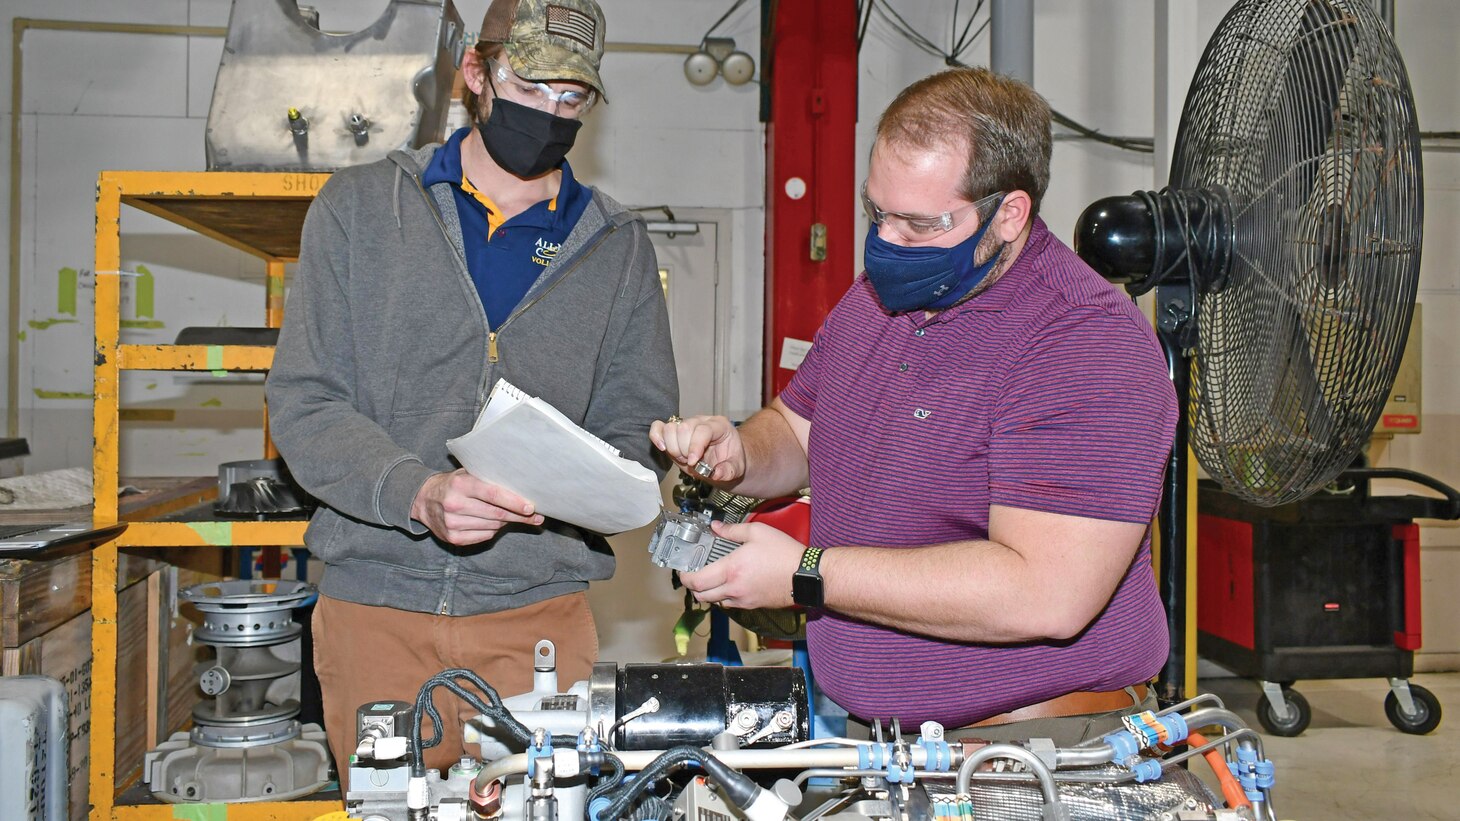 Rob Wansker (right), FRCE V-22 Power and Propulsion Auxiliary Power Unit (APU) senior engineer, and Derek Britton, mechanical engineer in the APU group, examine a clutch servo-valve filter for a V-22 APU. The APU group recently developed a process to clean and recertify these filters for use after supply issues made the critical part temporarily unavailable to the fleet.